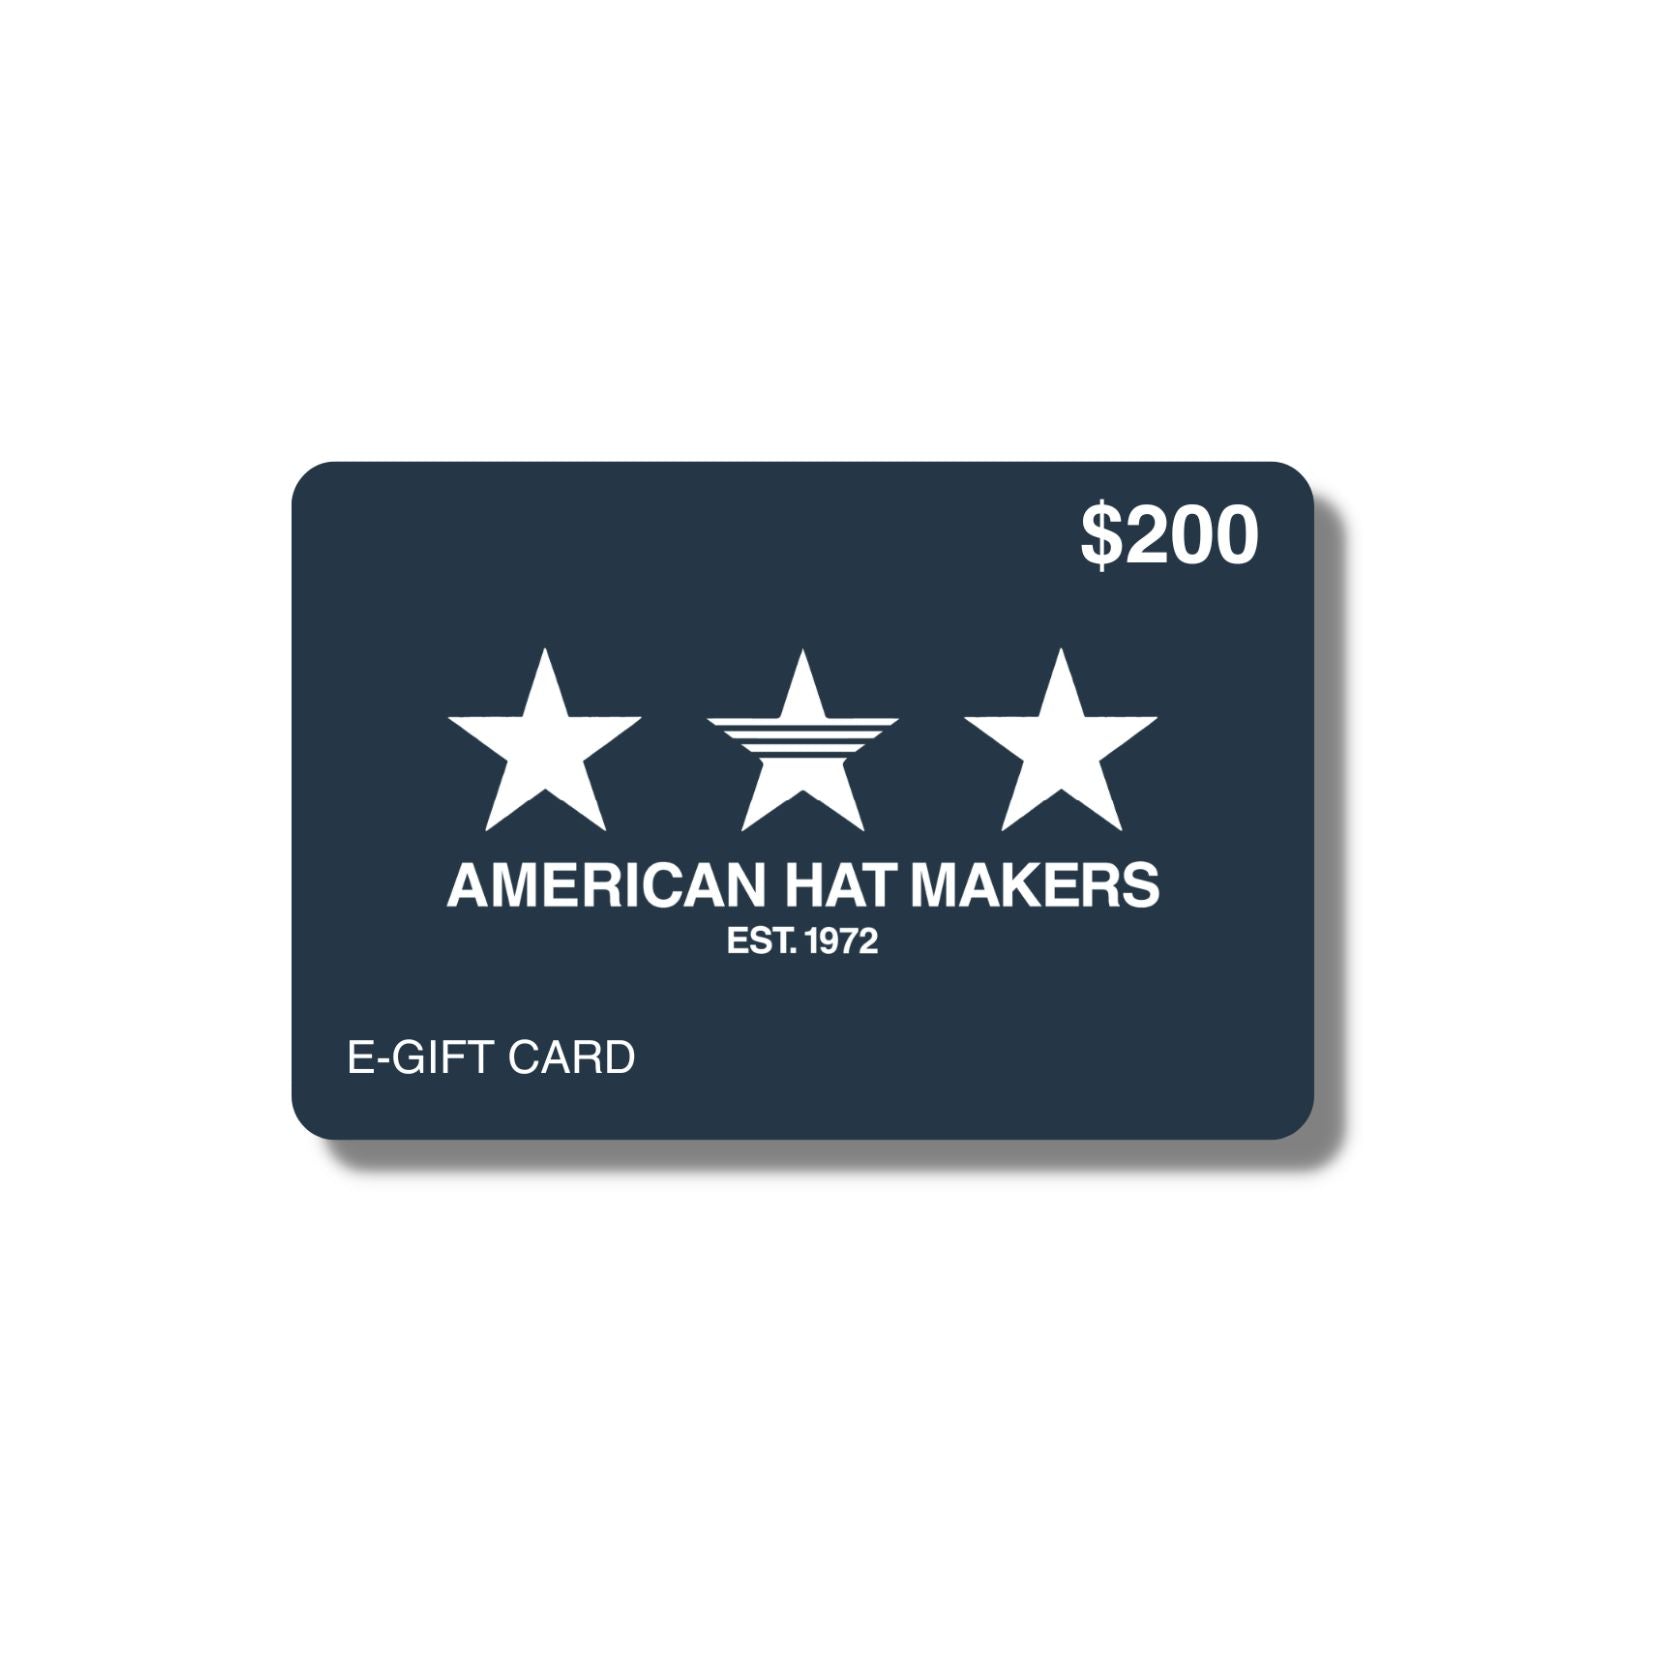 Electronic Gift Card amounting to $200 by American Hat Makers